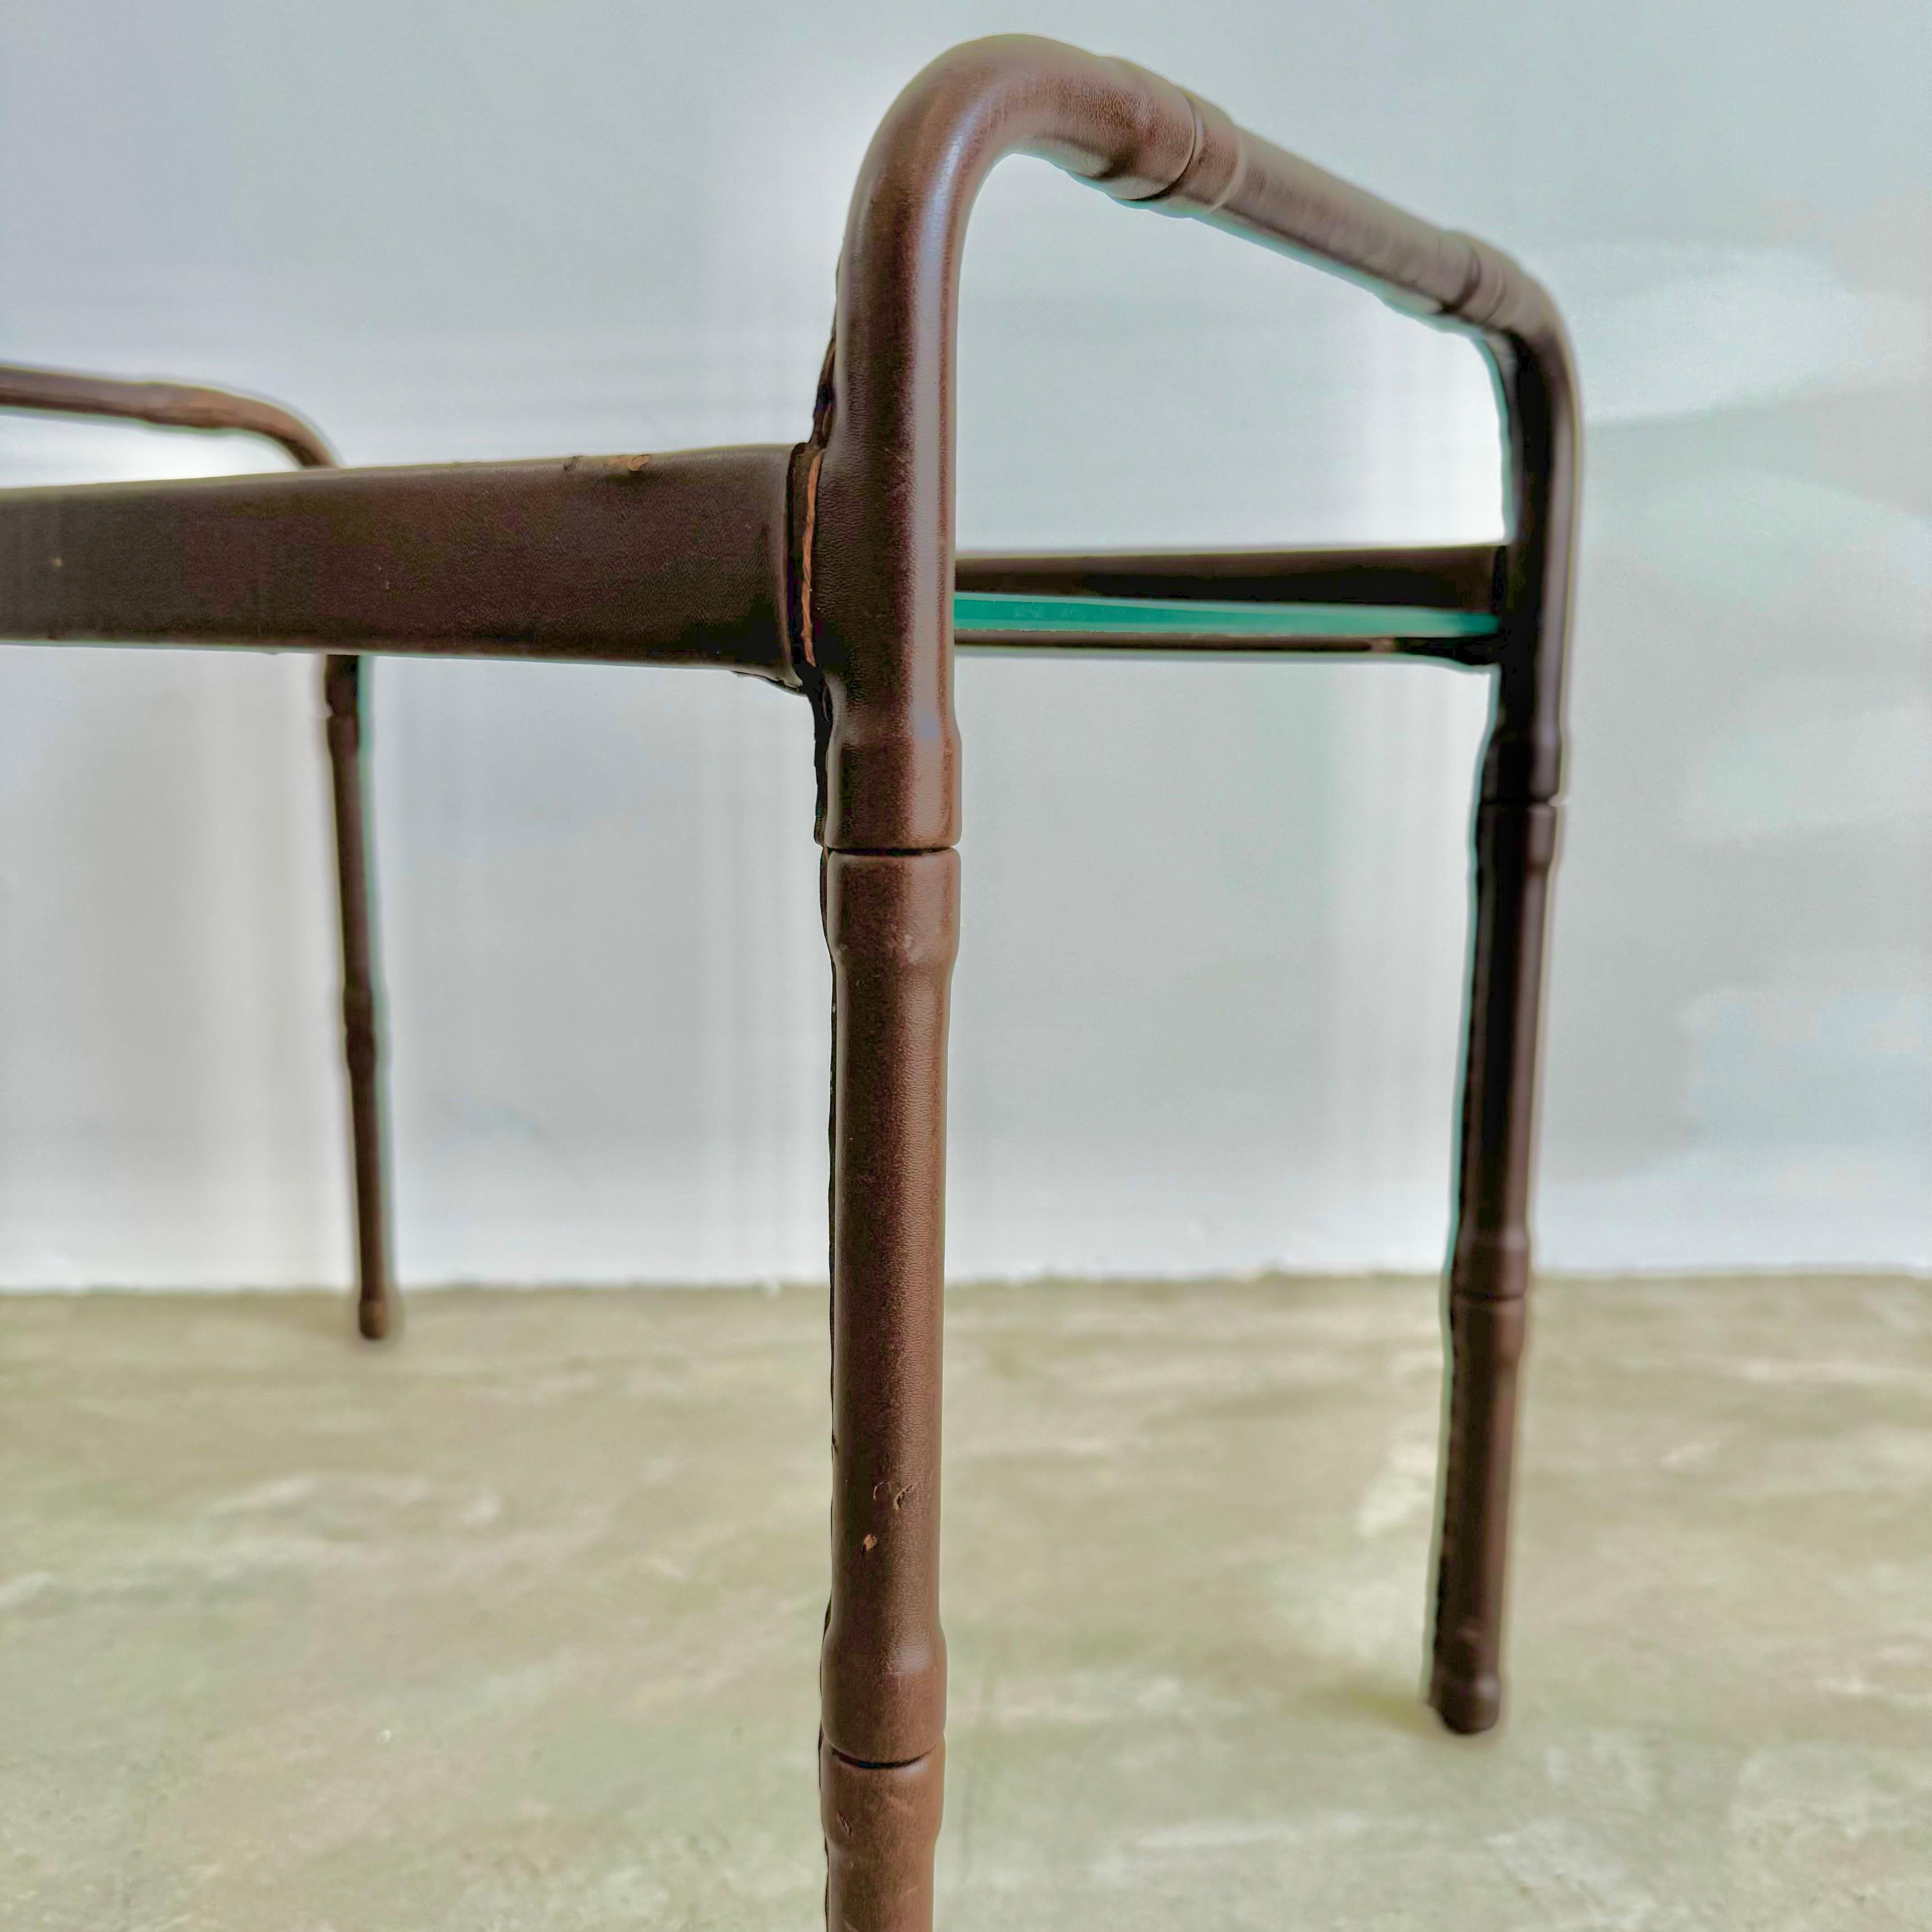 Jacques Adnet Leather and Glass Side Table, 1950s France For Sale 4